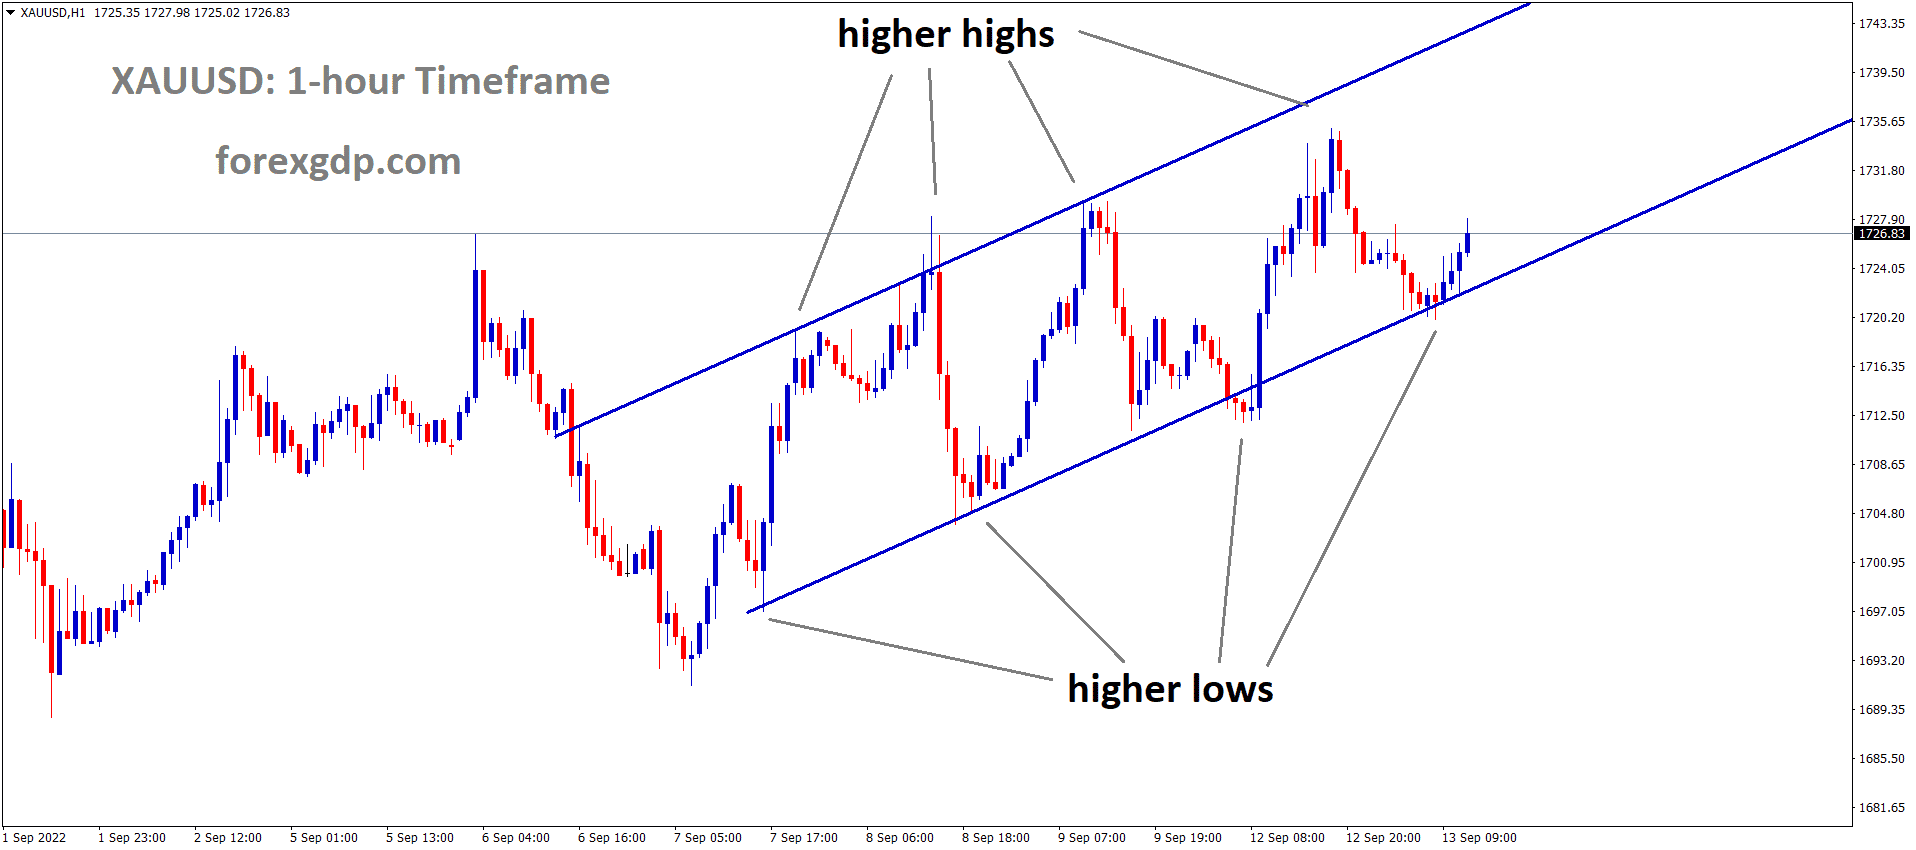 XAUUSD Gold price is moving in an Ascending channel and the market has rebounded from the higher low area of the channel.